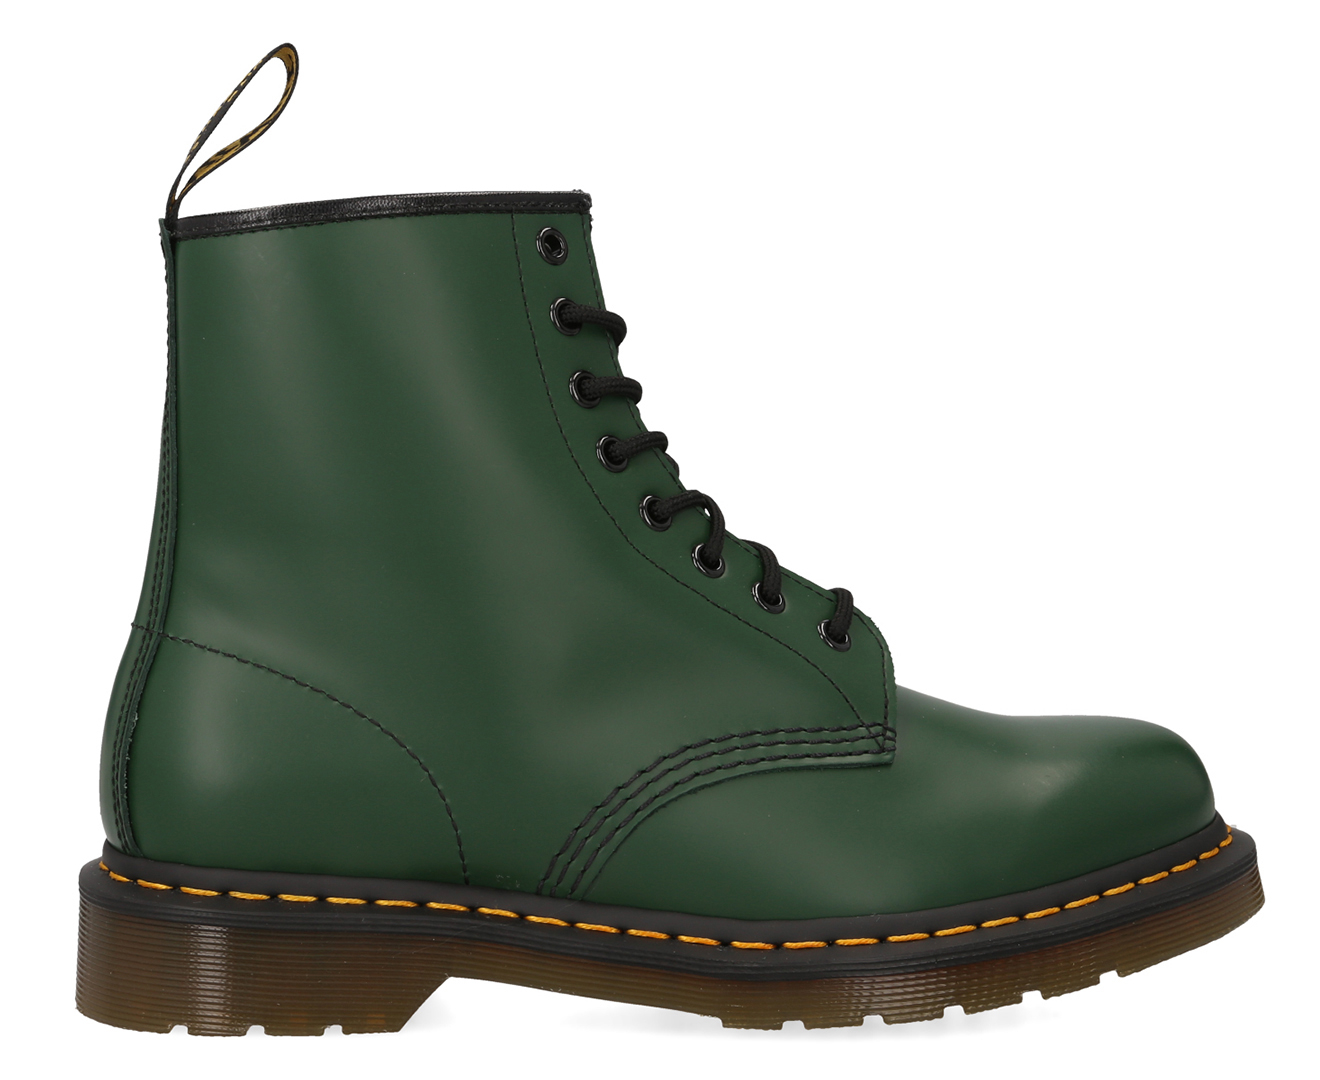 Dr. Martens Unisex 1460 Smooth Leather Boots - Green | Catch.com.au